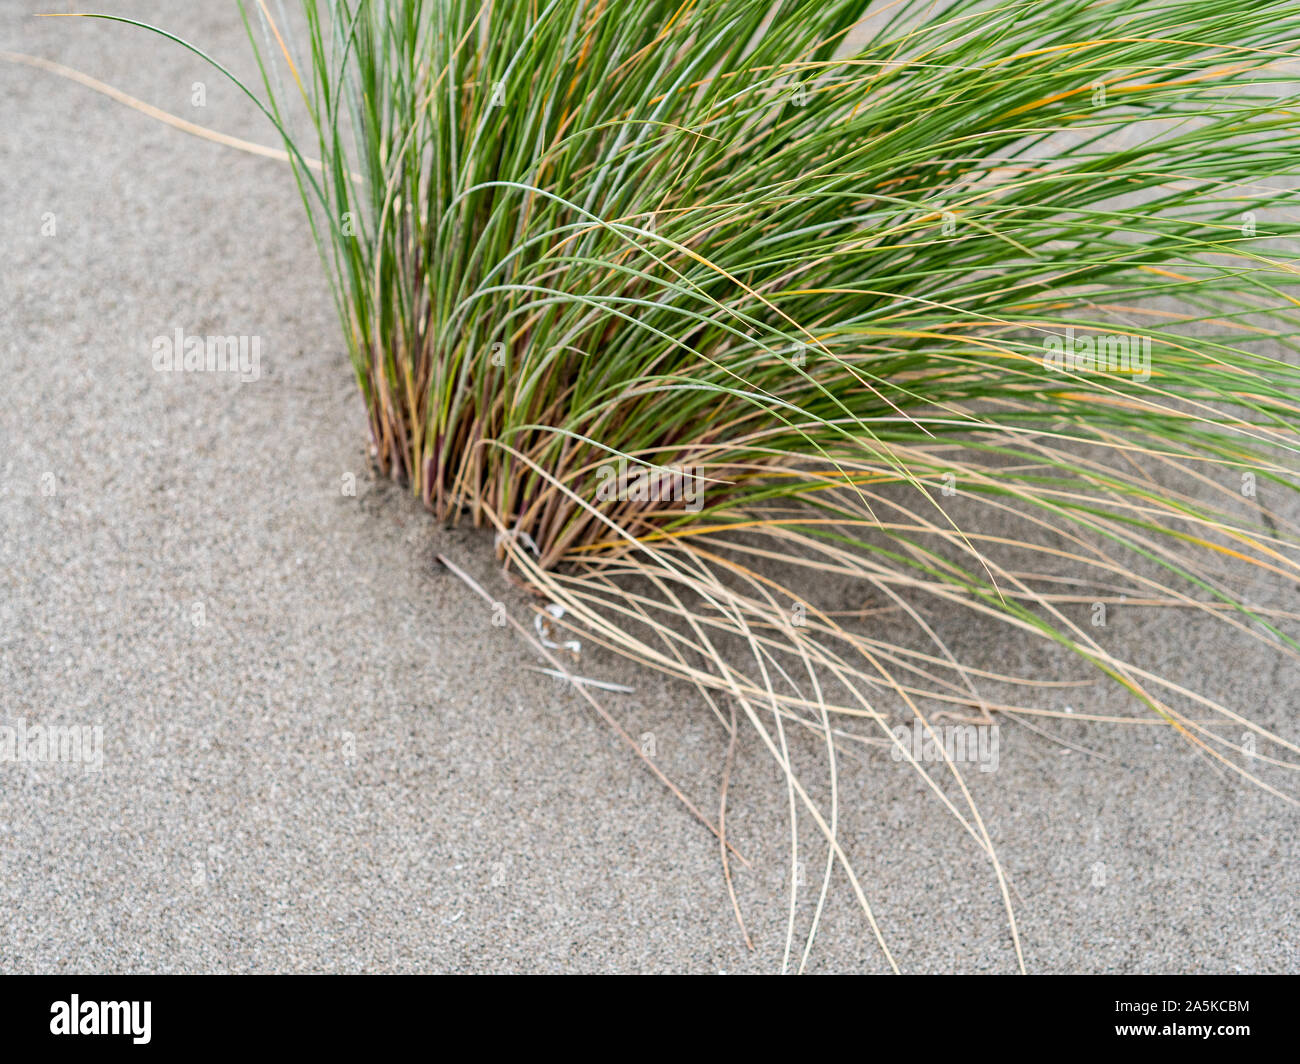 Detail of green sea grass growing in sand Stock Photo